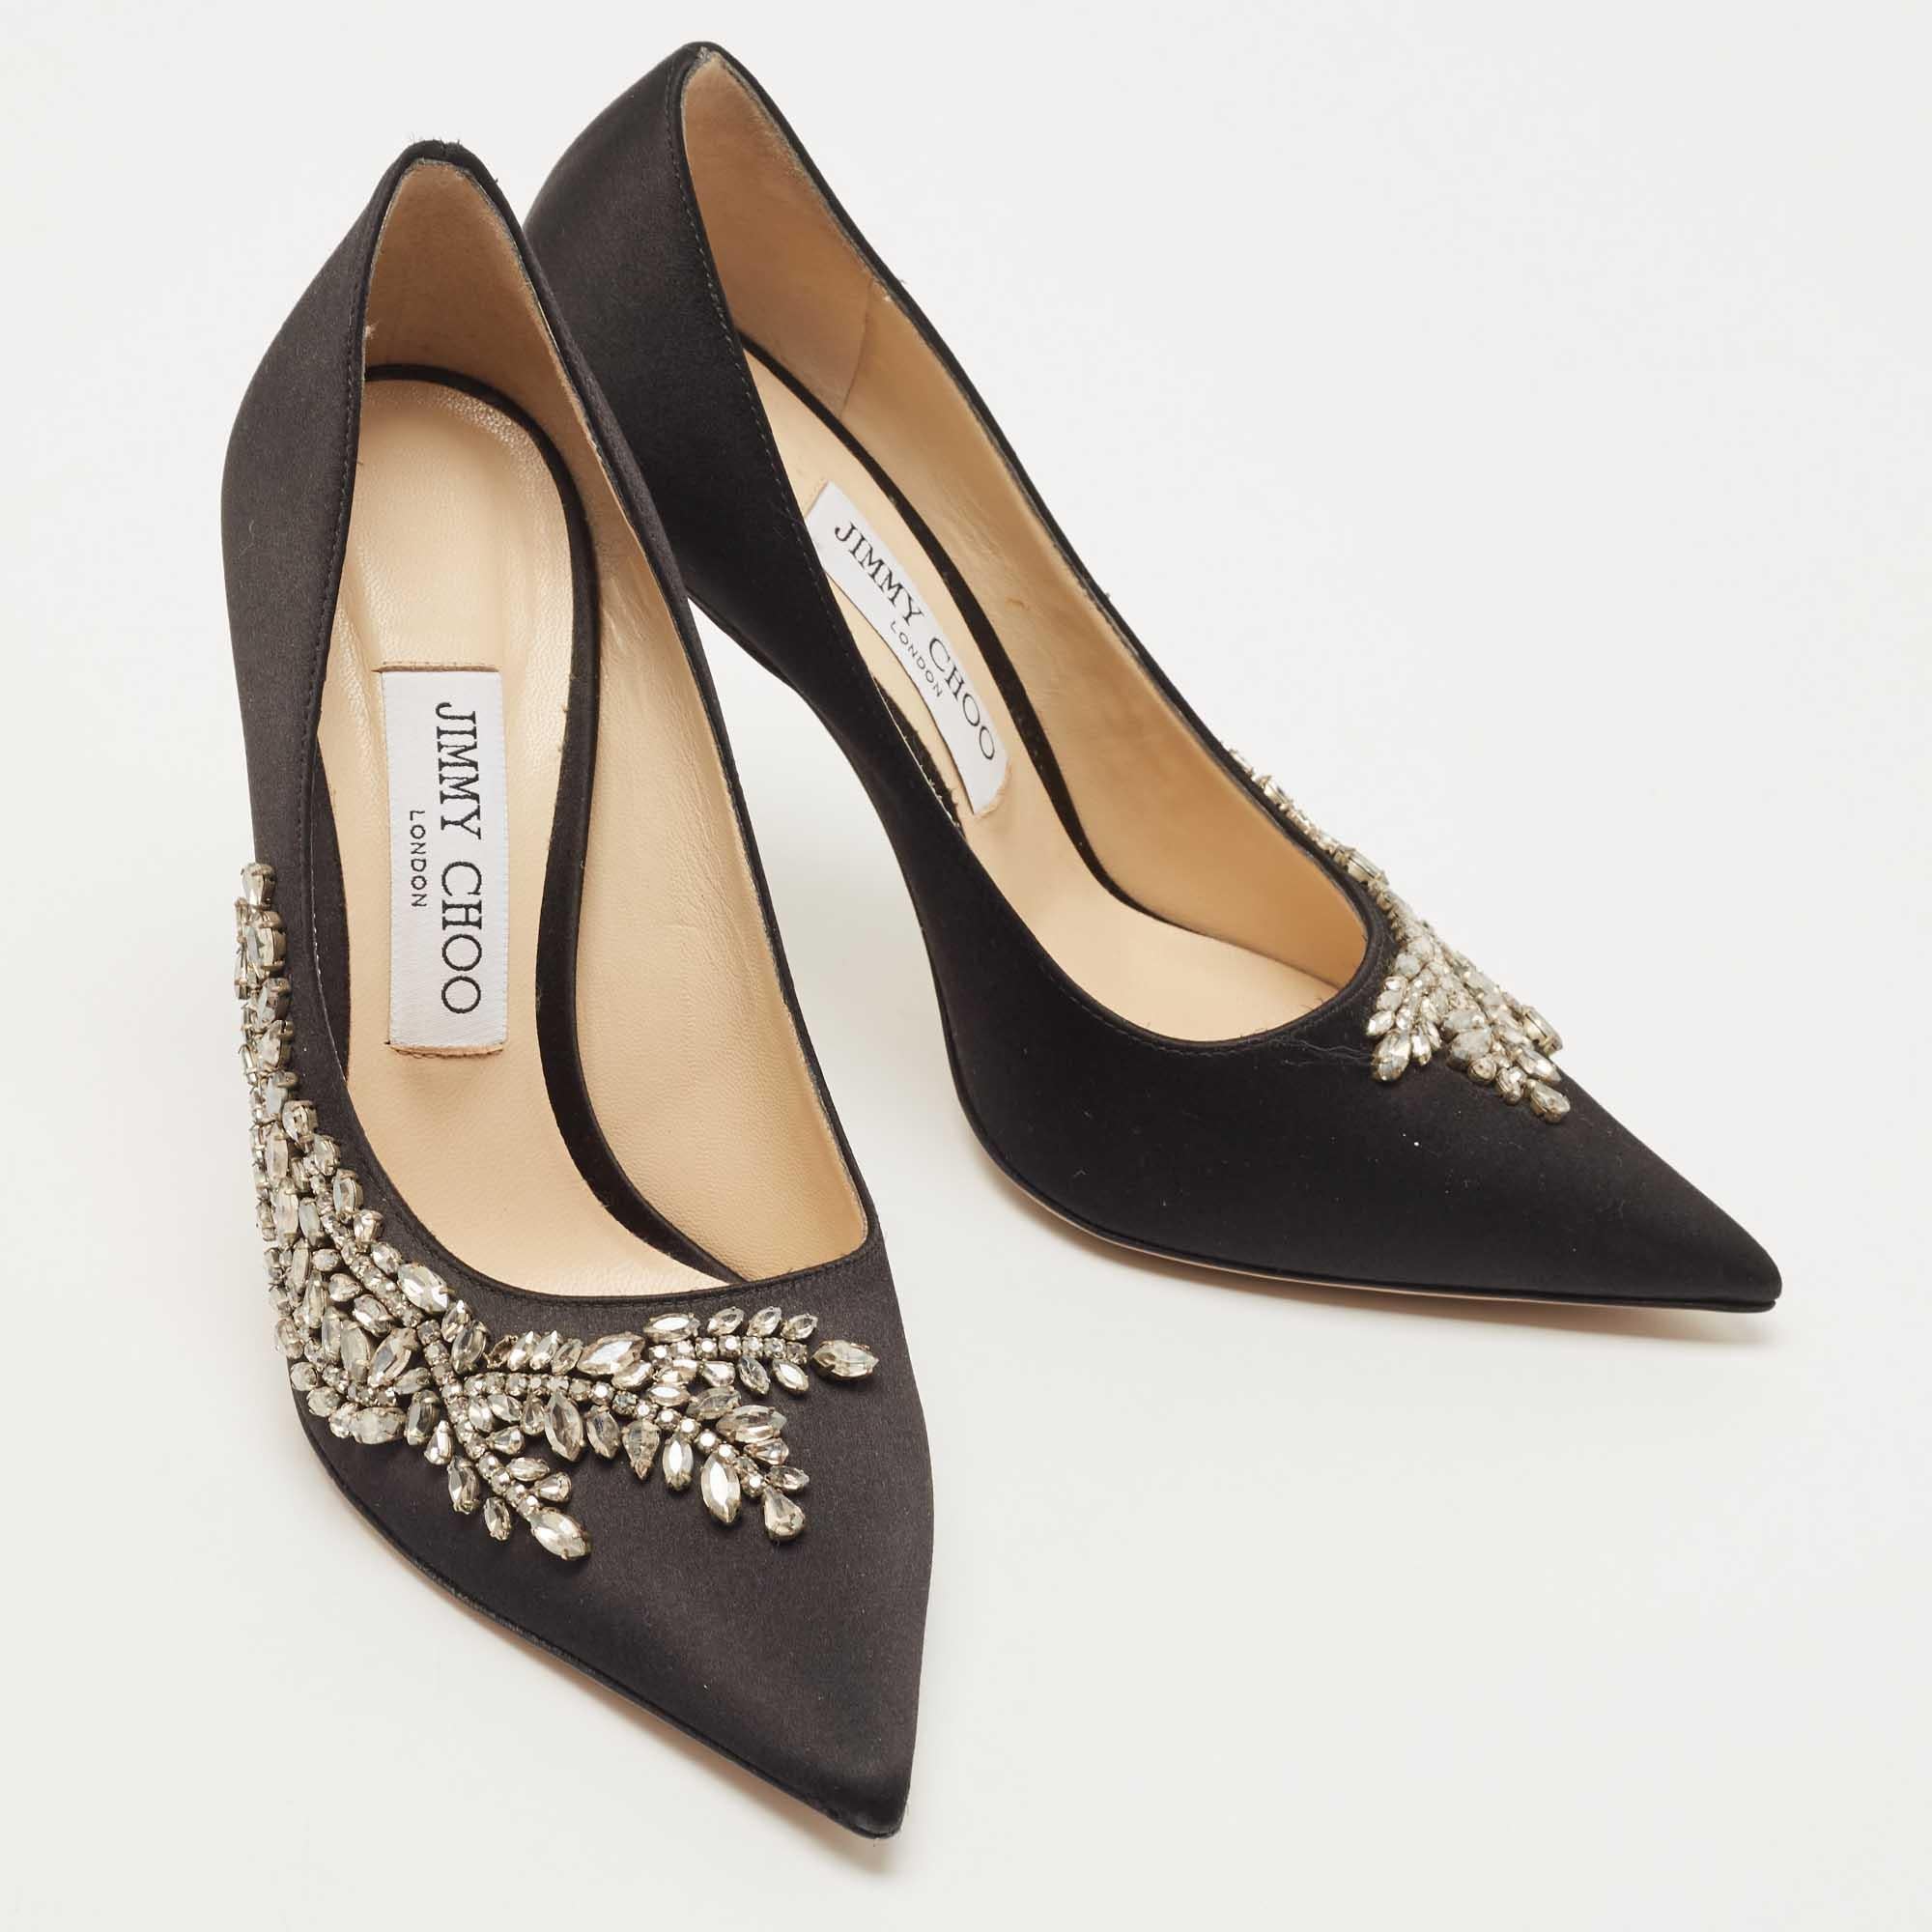 Jimmy Choo Black Satin Love Crystal Embellished Pointed Toe Pumps Size 37.5 In Good Condition For Sale In Dubai, Al Qouz 2